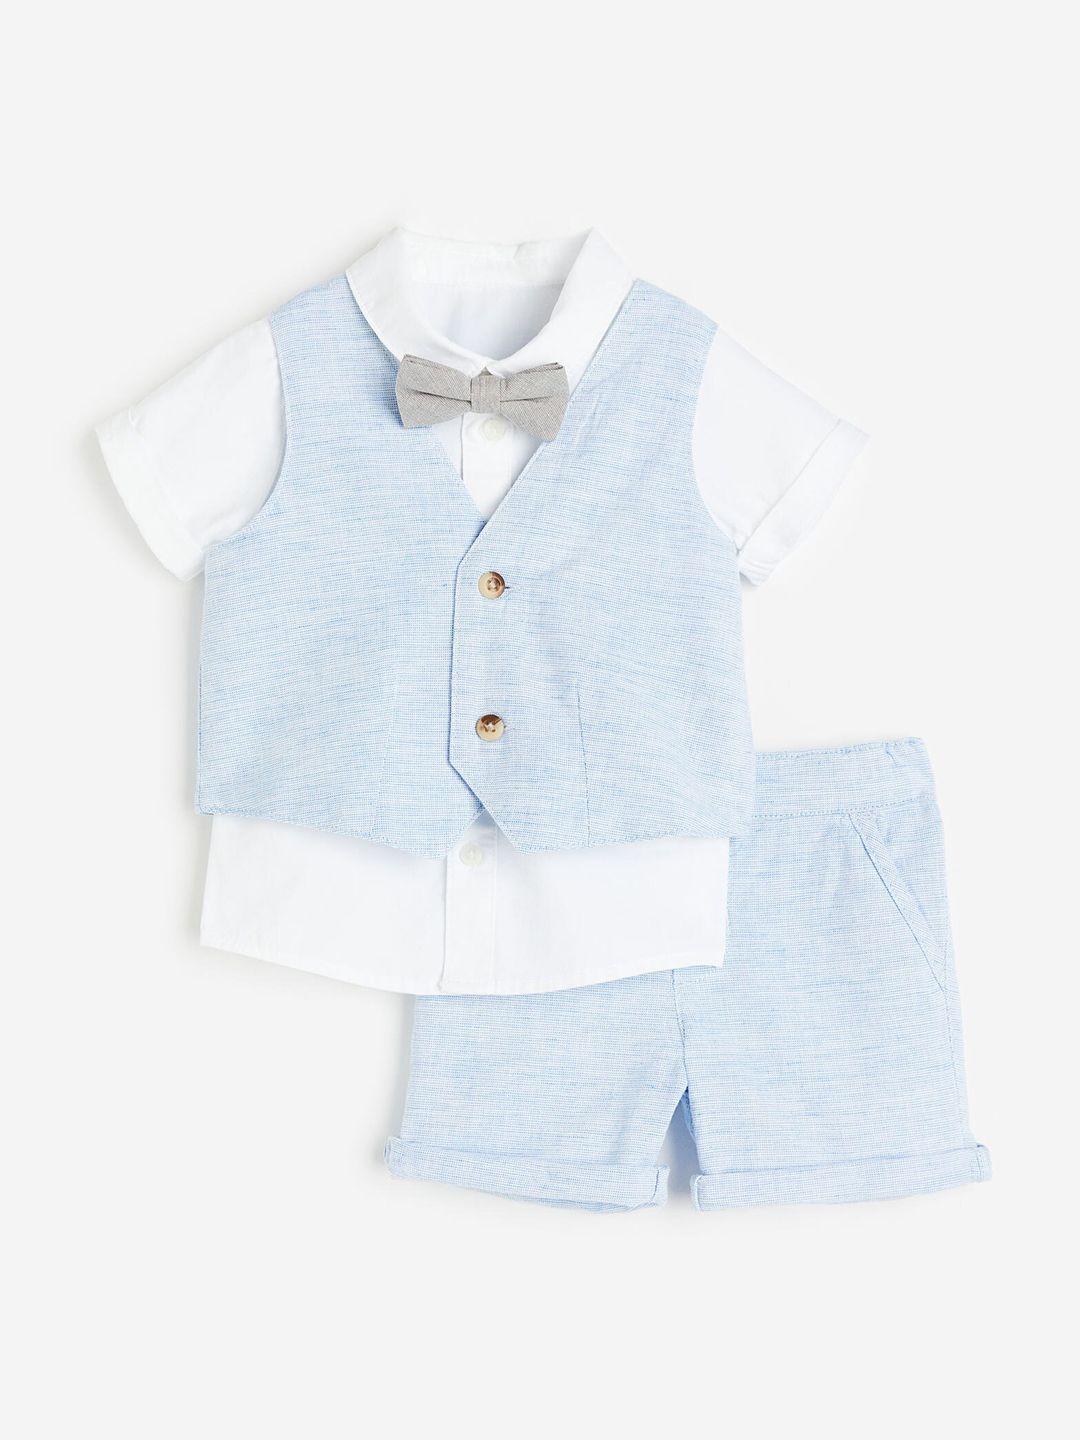 h&m boys 3-piece set with a bow tie